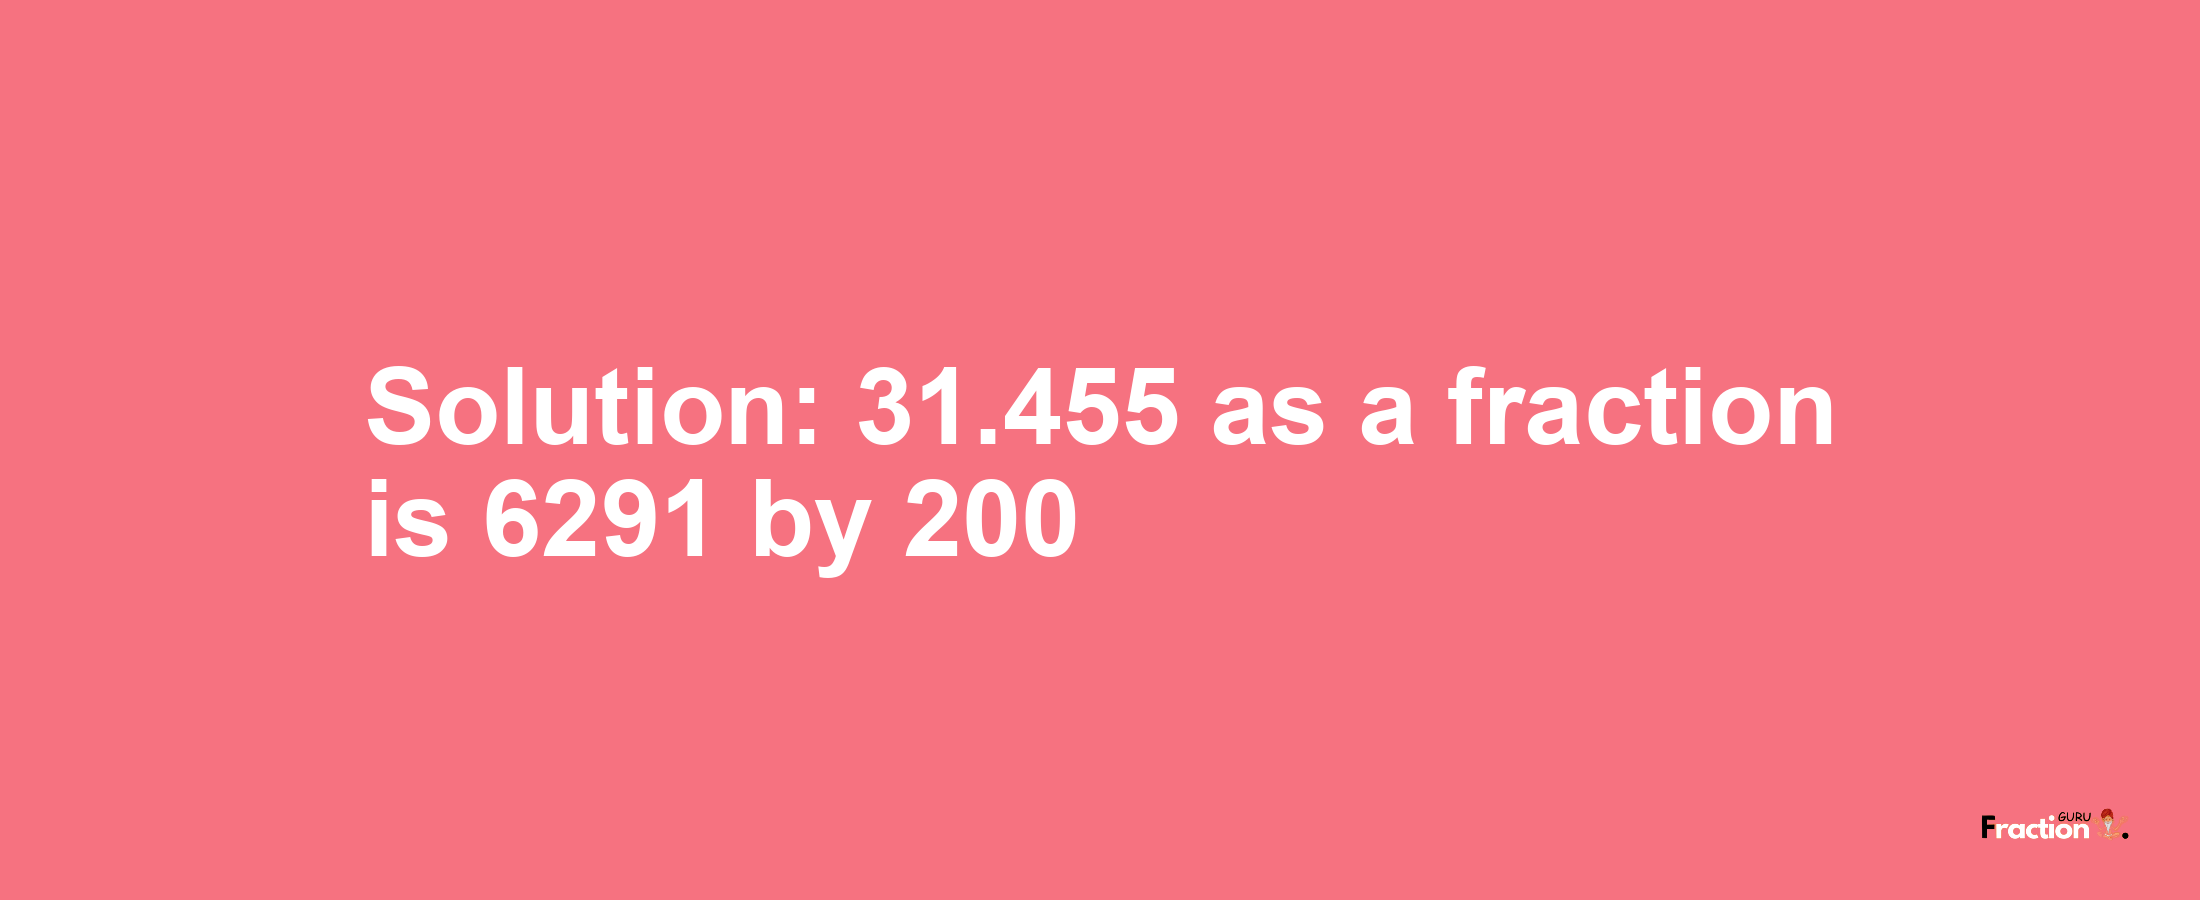 Solution:31.455 as a fraction is 6291/200